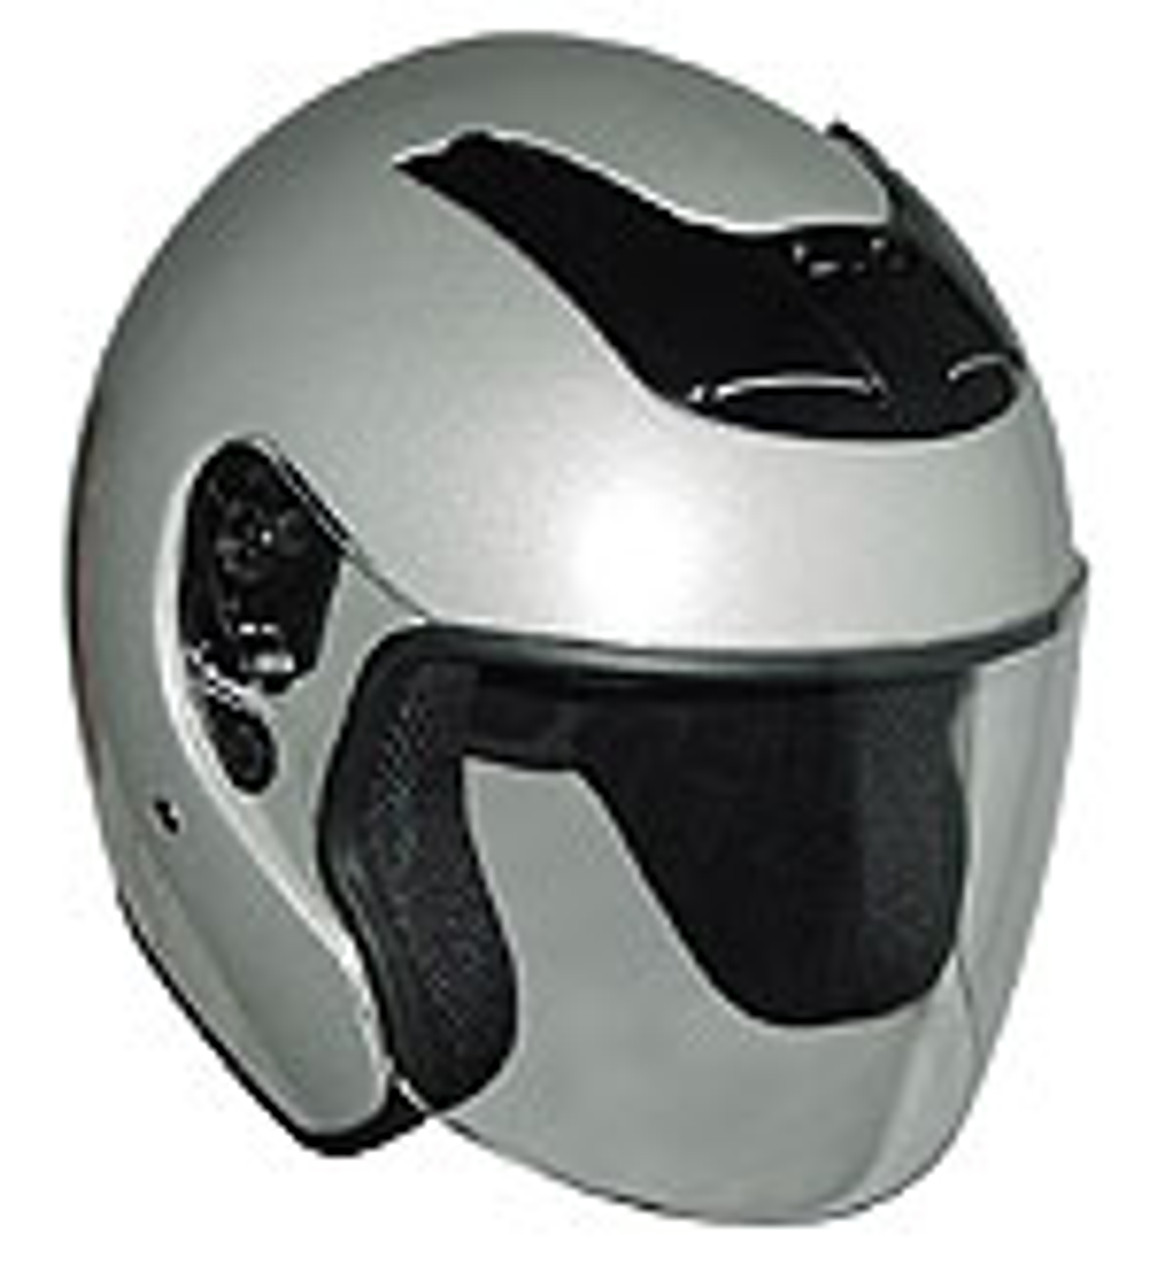 DOT ¾ Shell RK4 Silver Motorcycle Helmet with removable visor